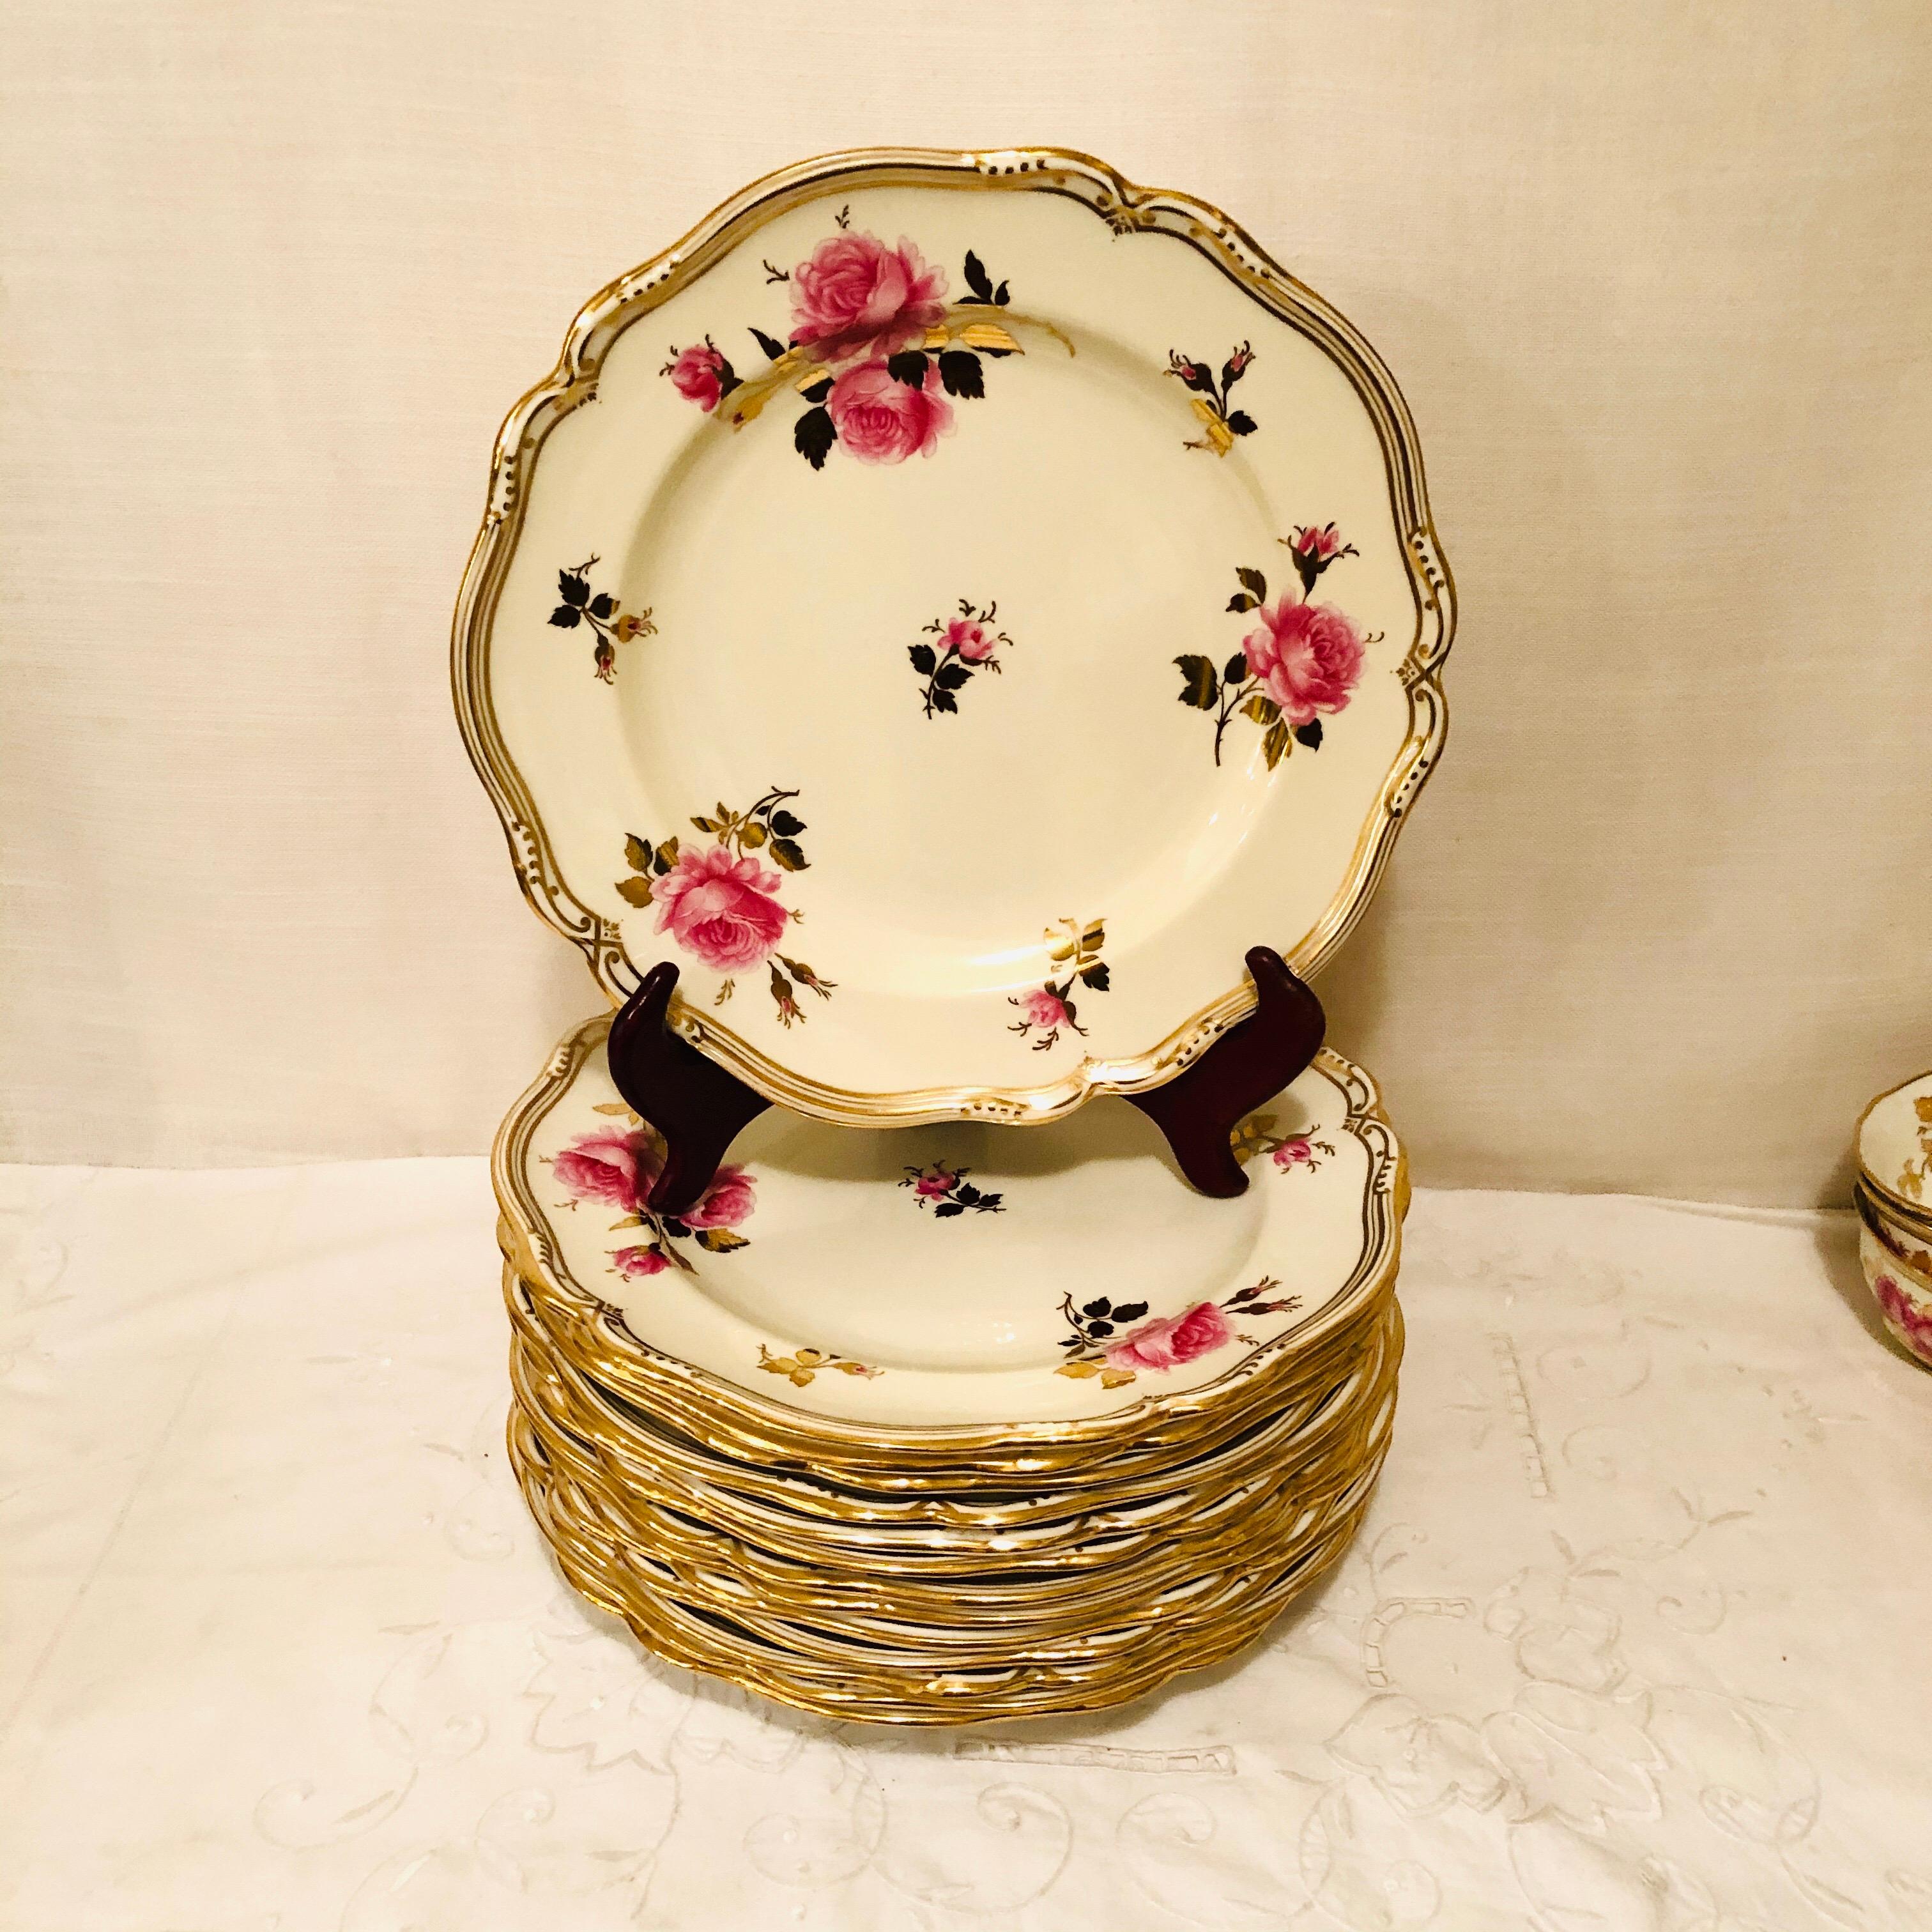 Hand-Painted Spode Made for Tiffany 66 Piece Dinner Service Decorated with Large Pink Roses